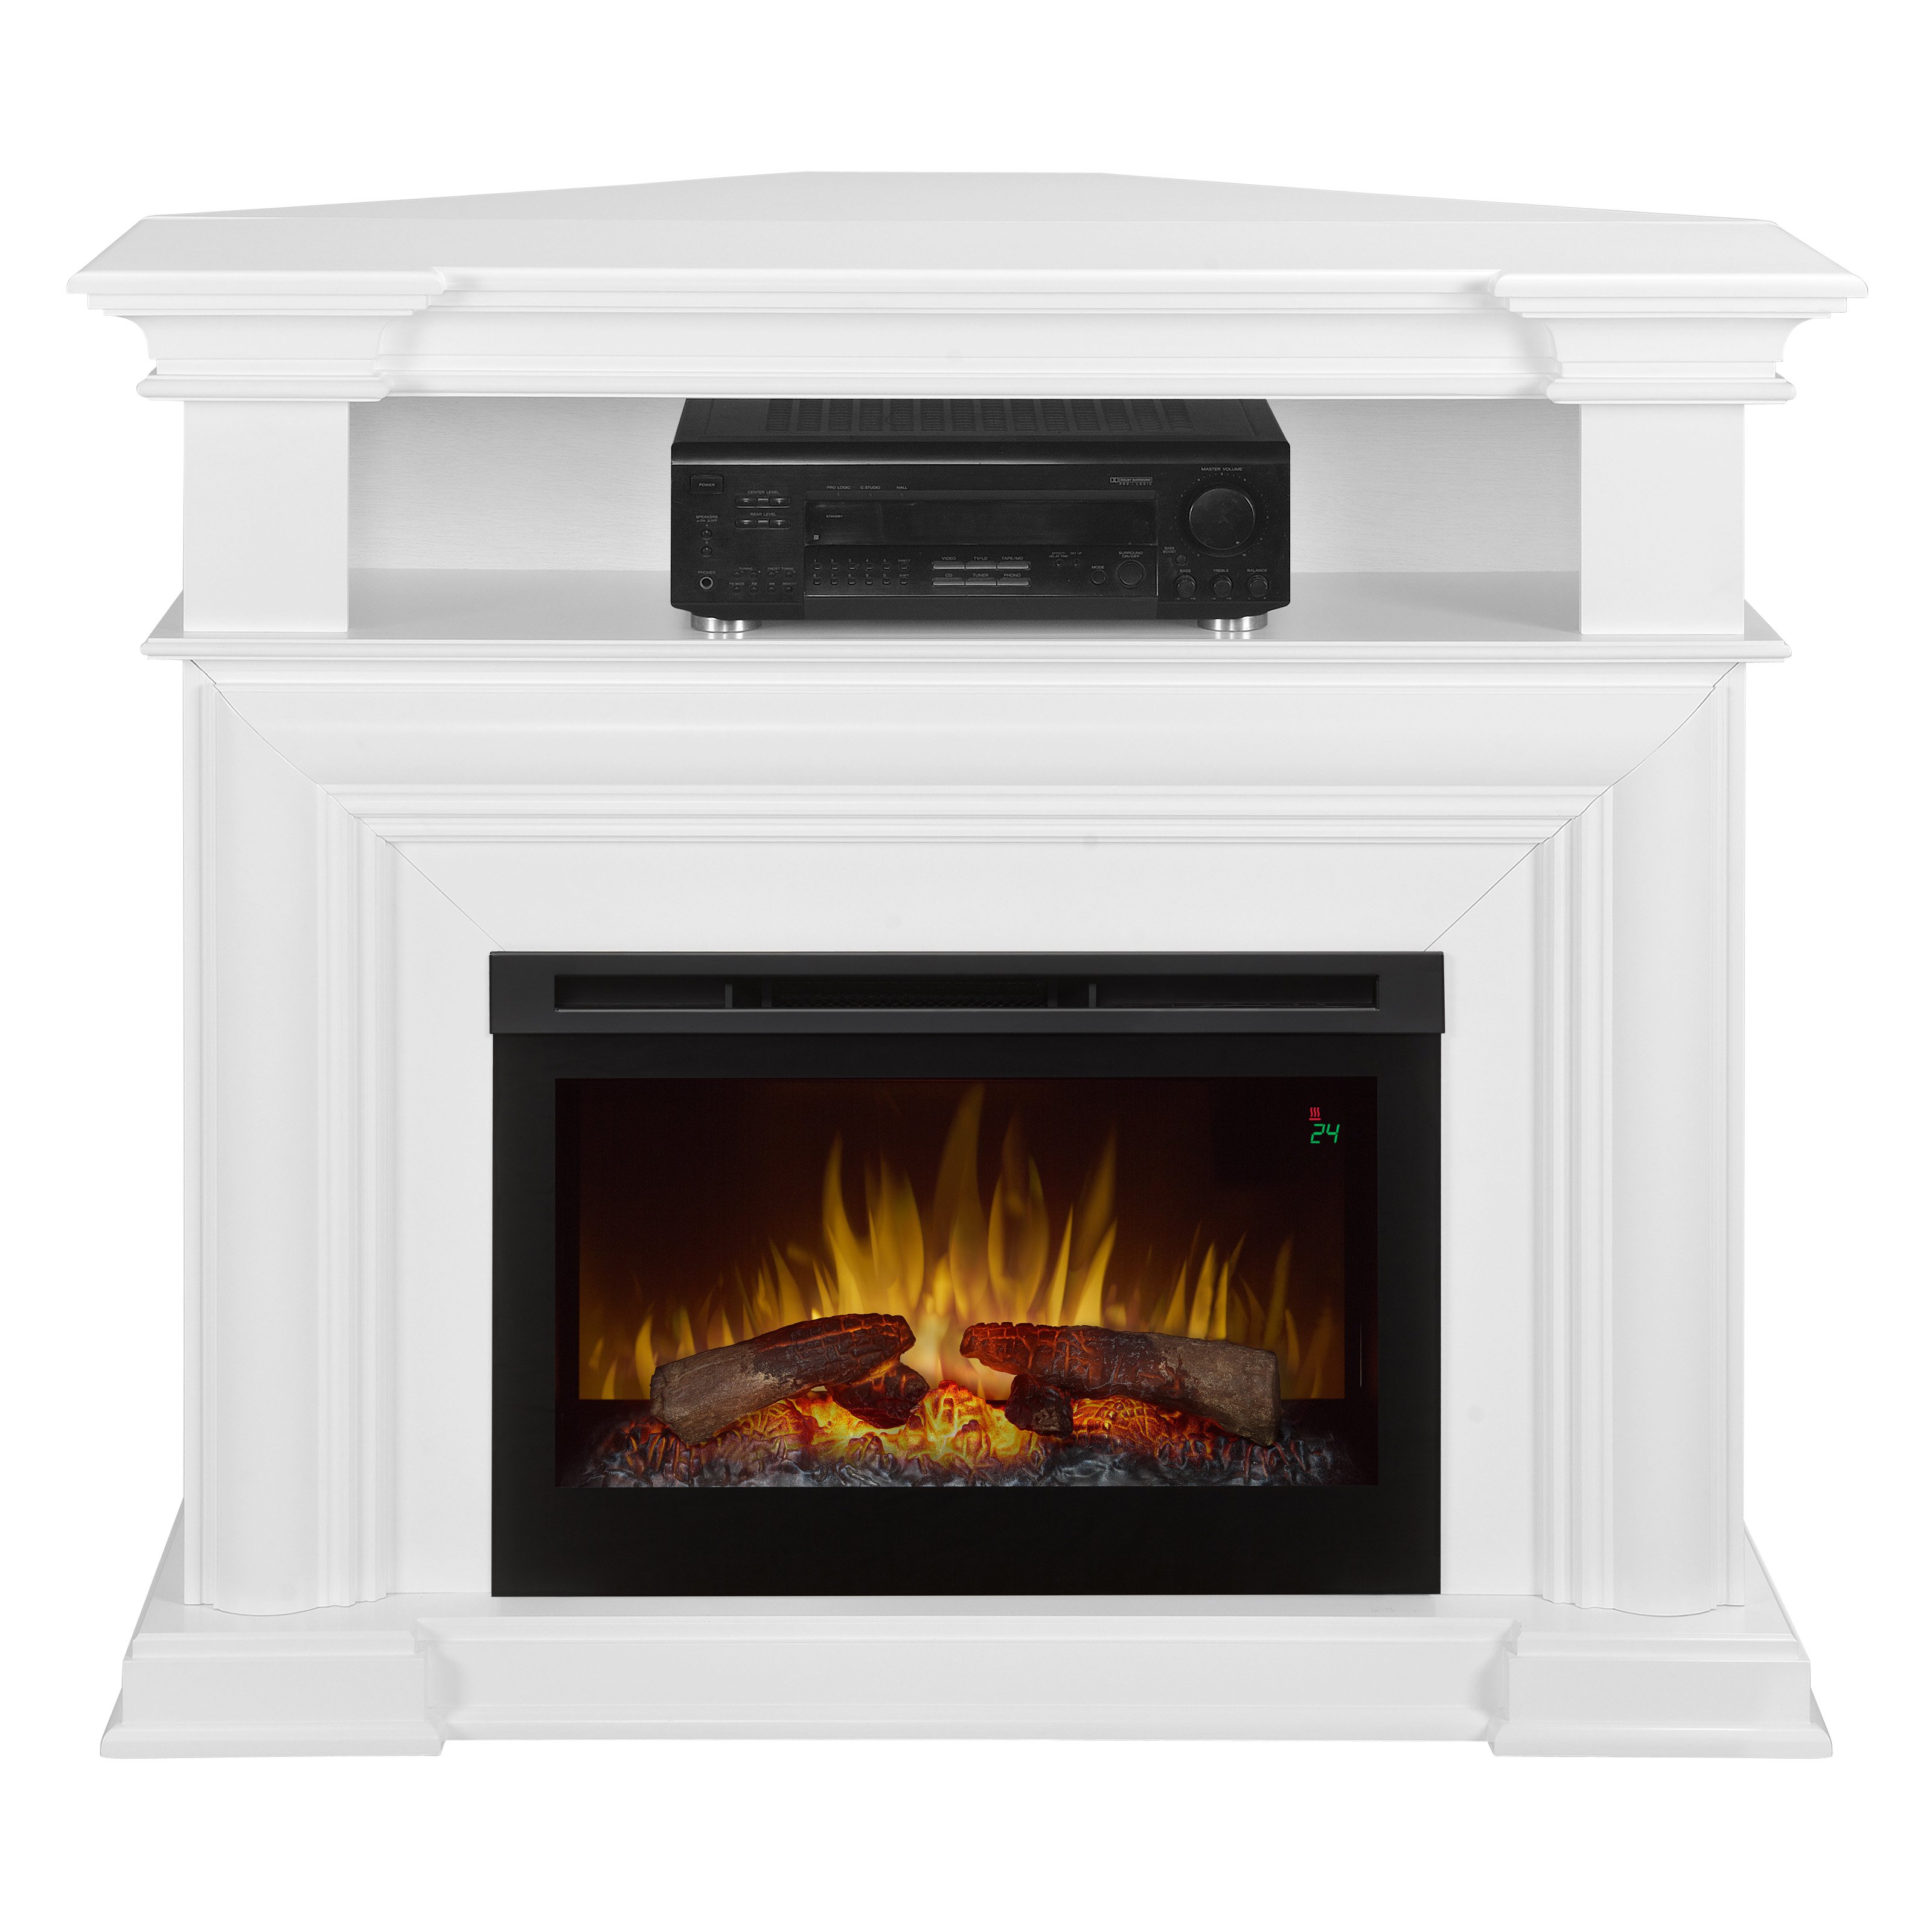 Mid Century Modern Electric Fireplace Best Of Electric Fireplace with Convertible Corner Option and Drop Down Front